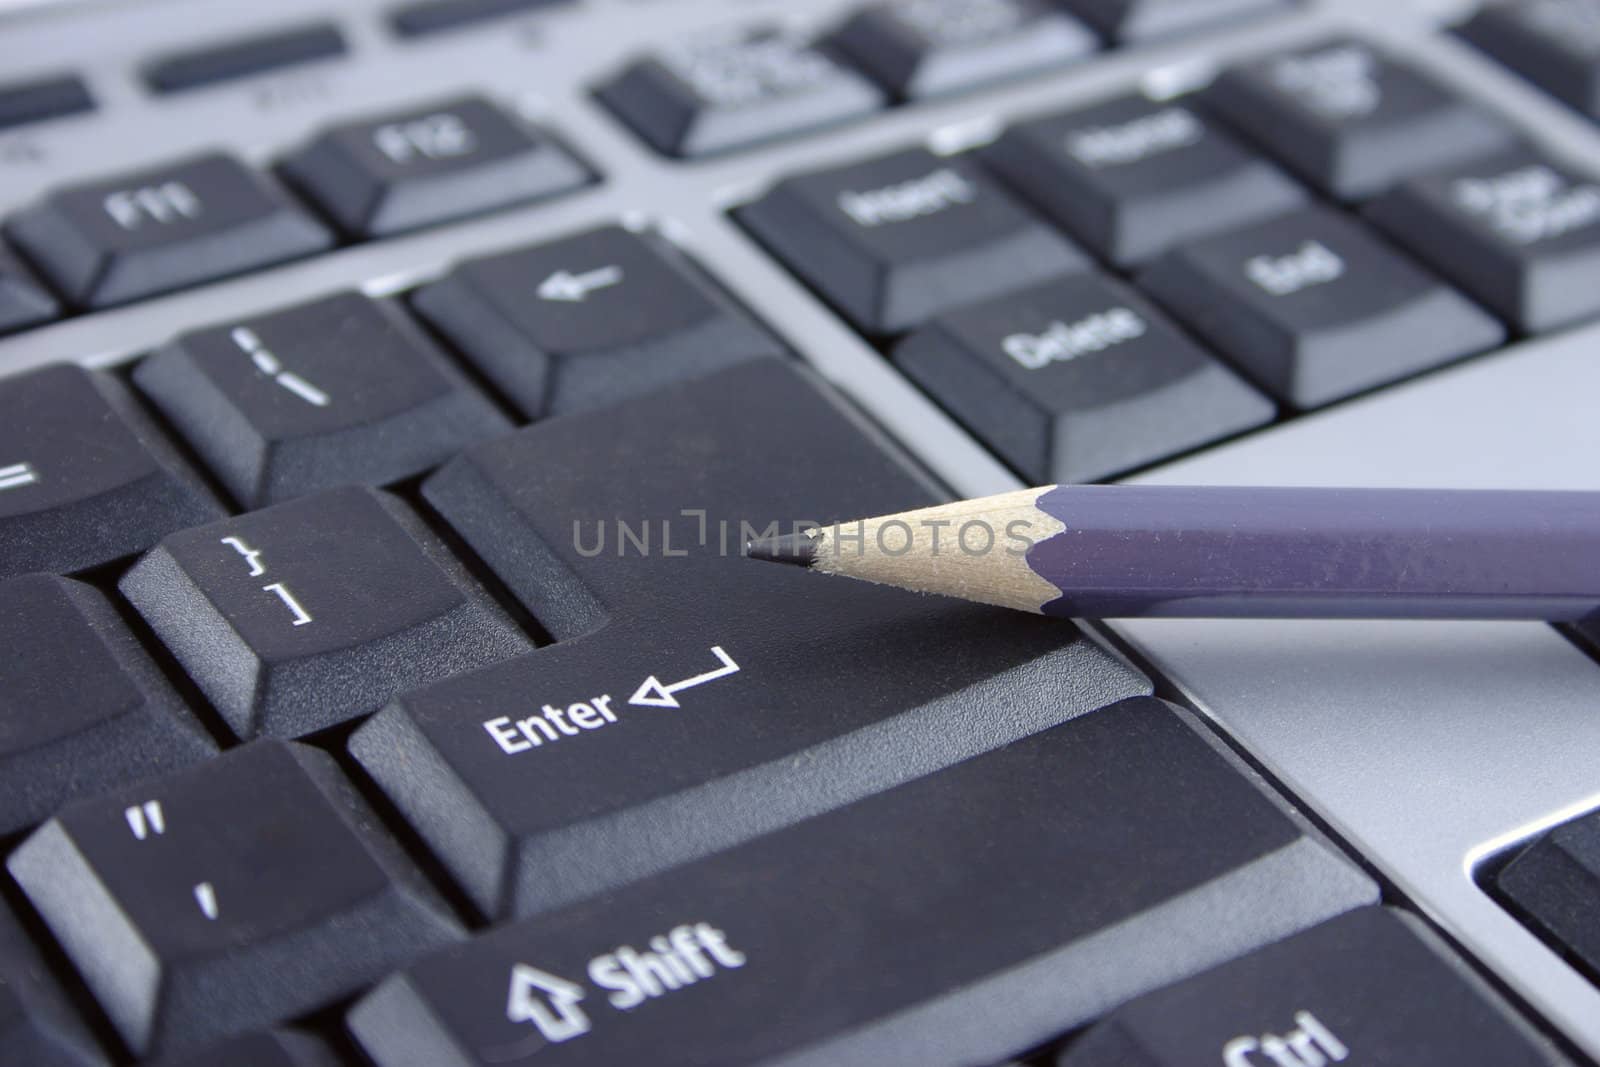 The pencil lying on a key Enter the computer keyboard